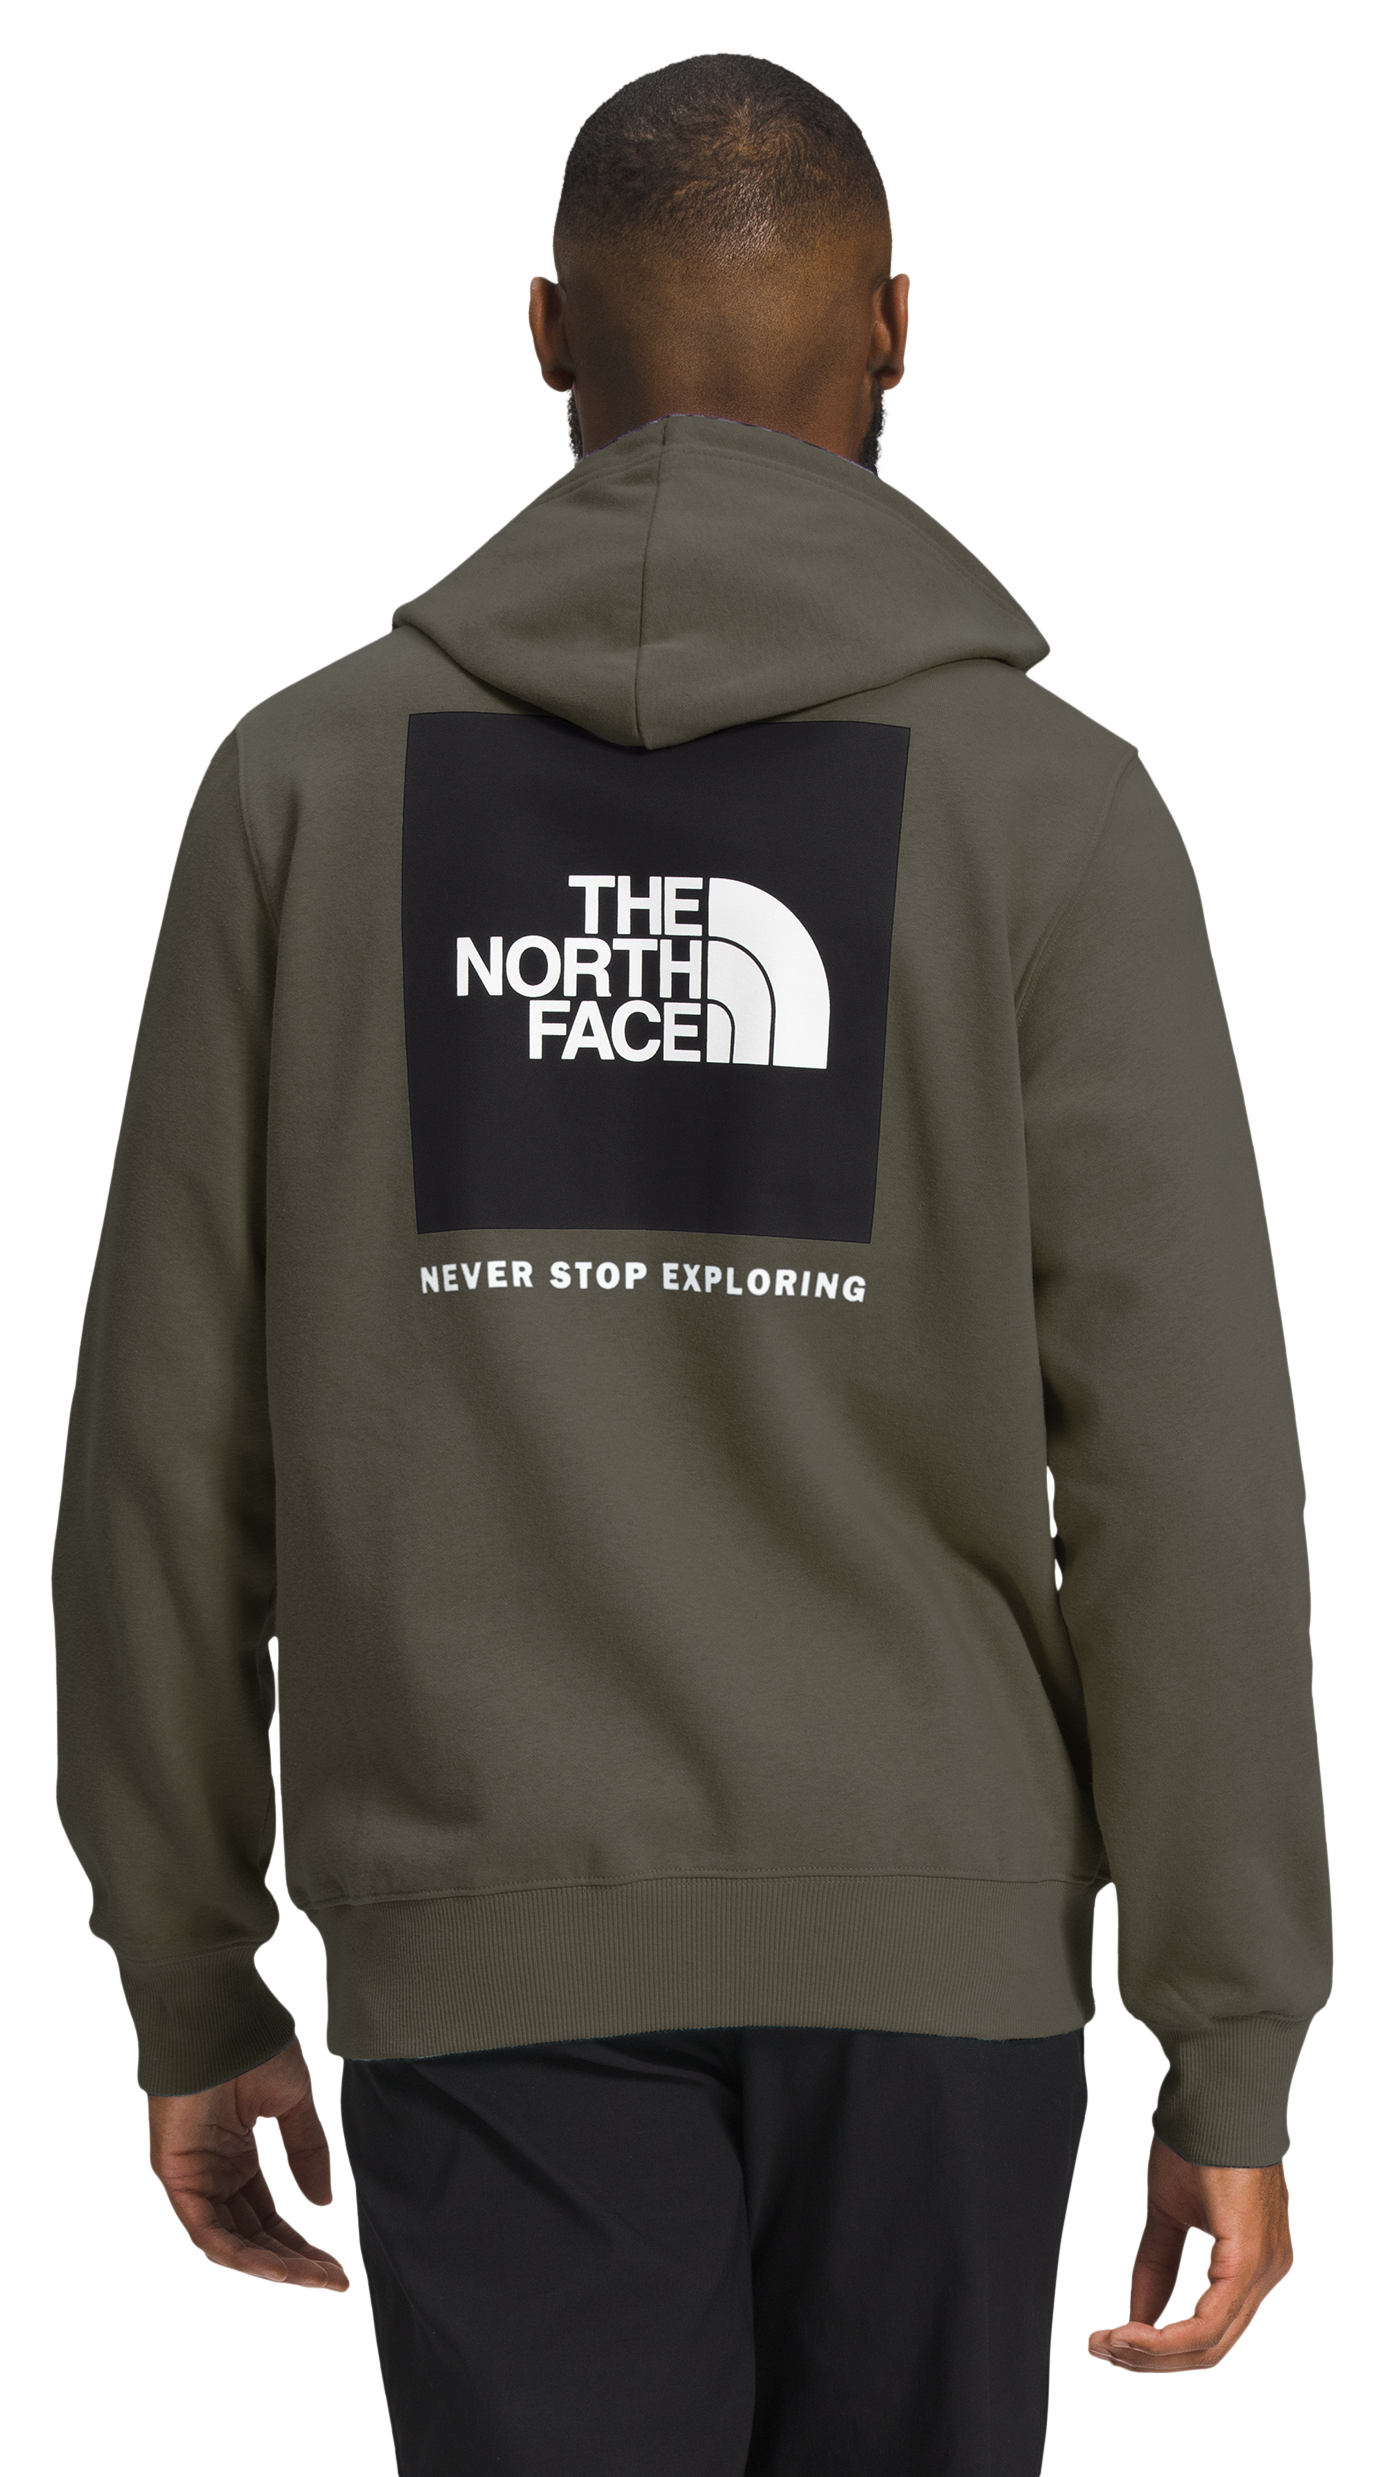 The North Face Box NSE Long-Sleeve Hoodie for Men - New Taupe Green/Black - 2XL